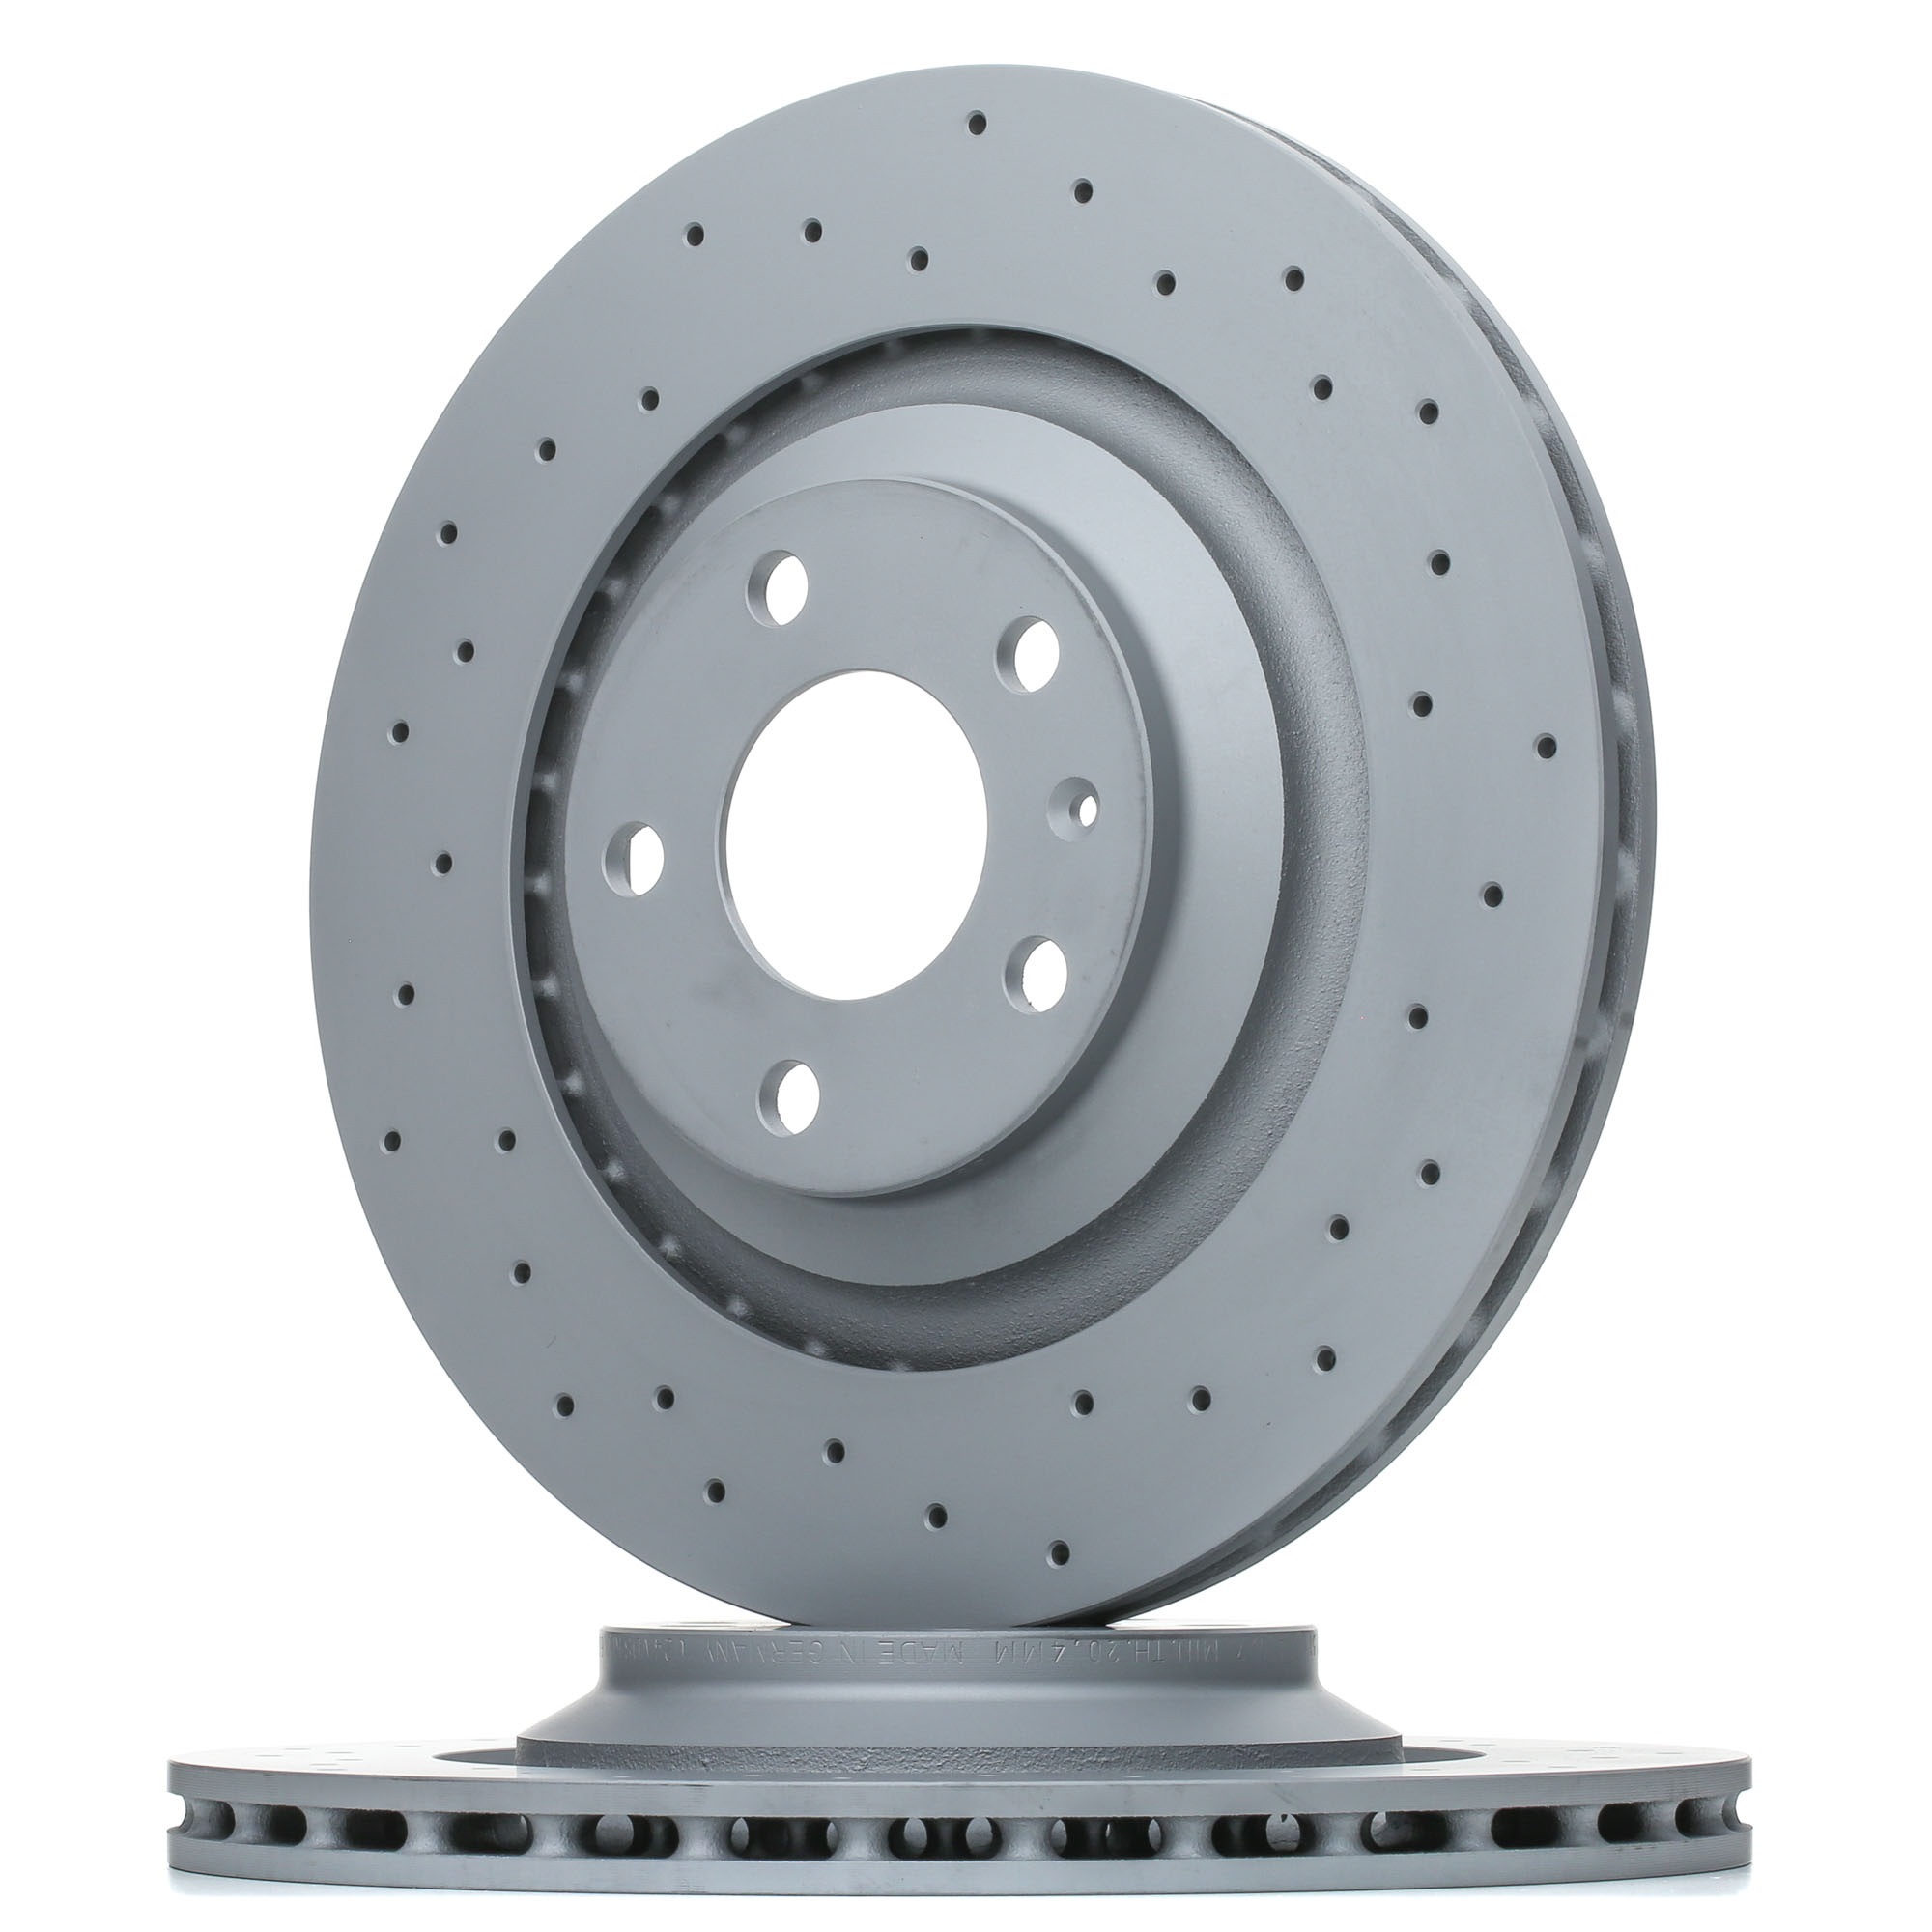 ZIMMERMANN SPORT COAT Z 100.3321.52 Brake disc 330x22mm, 6/5, 5x112, Externally Vented, Perforated, Coated, High-carbon